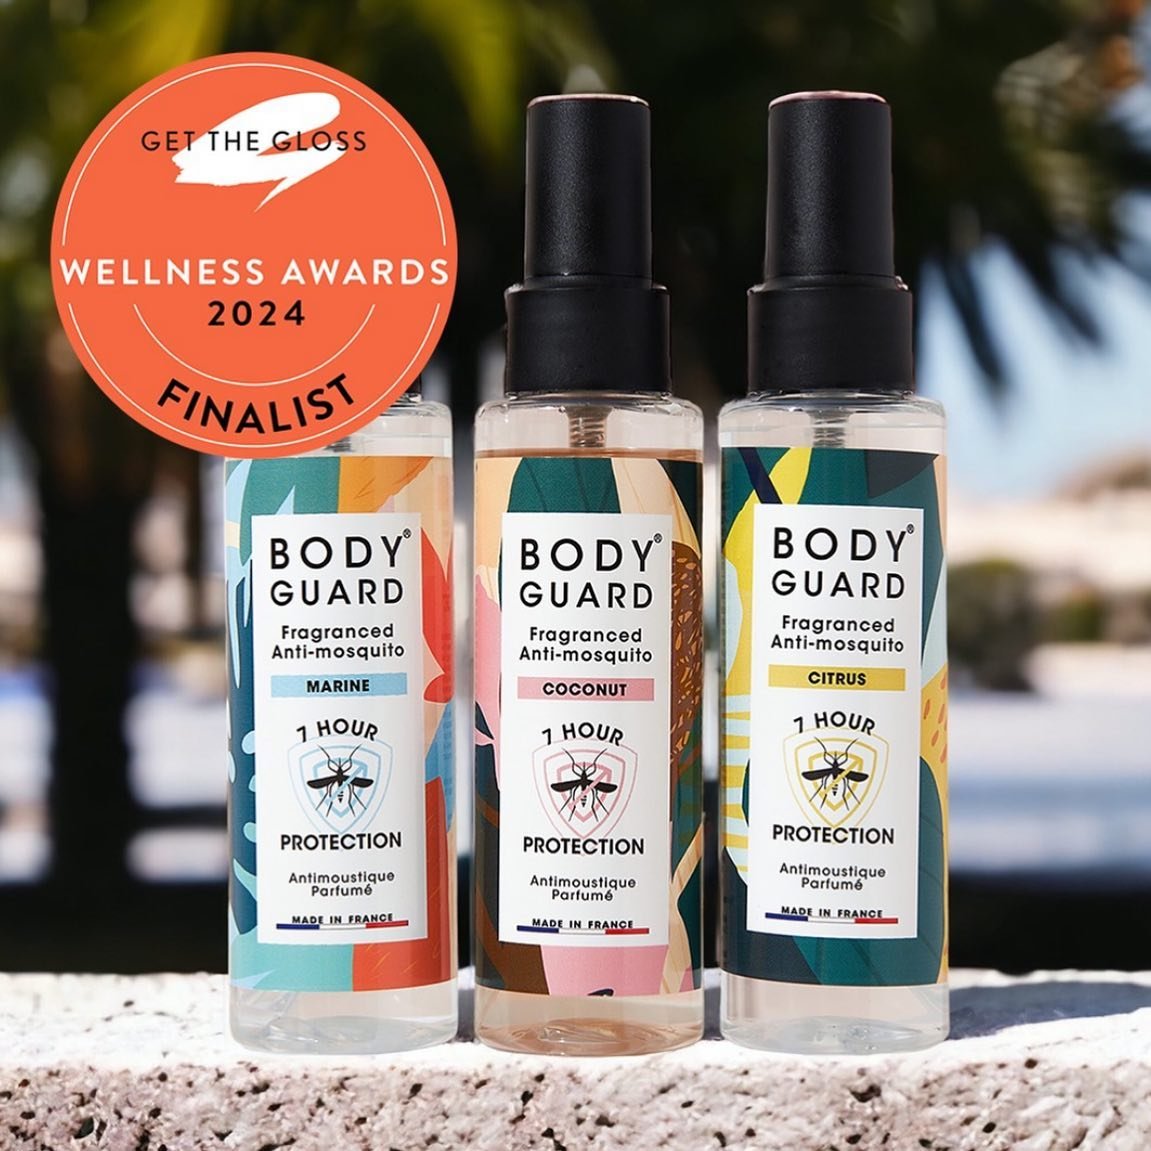 We&rsquo;re very proud to be working with @bodyguardprotect_uk and to announce that their Functional Fragrance is a finalist in this year&rsquo;s @getthegloss Wellness Awards 🏆 
We&rsquo;re wishing their fragranced anti mosquito sprays do well, and 